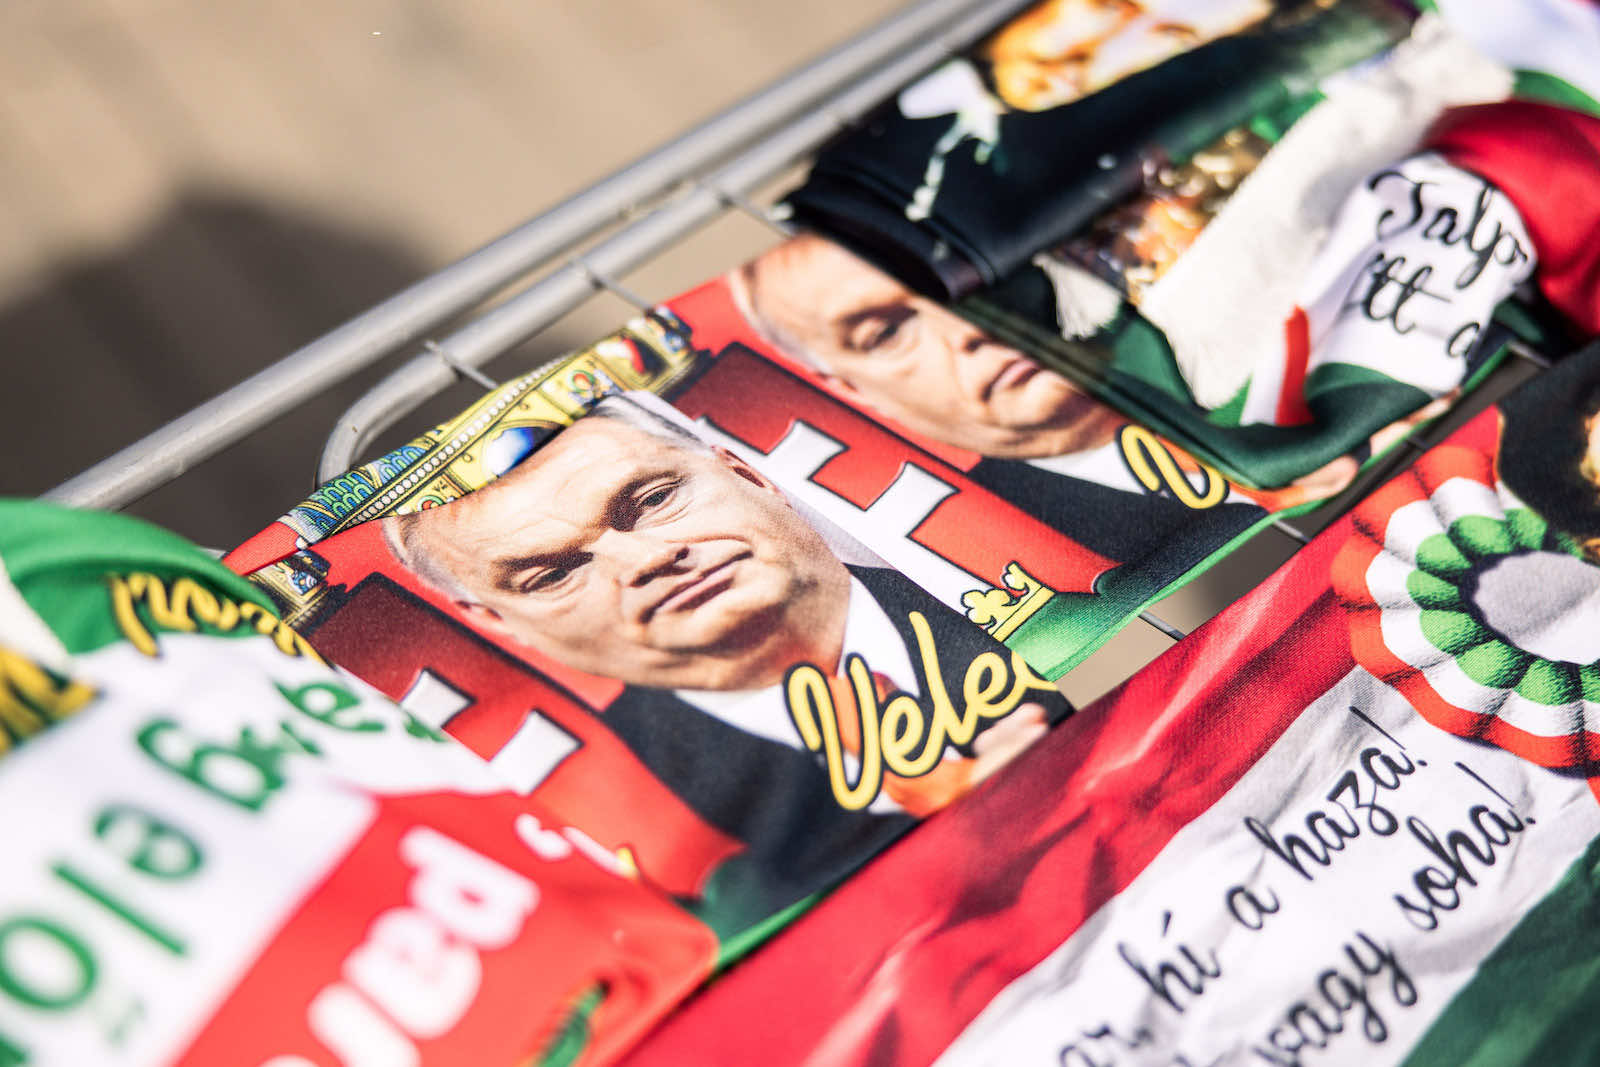 Banners depicting Viktor Orban, Hungary’s prime minister, during a Fidesz party freedom march in Budapest, Hungary, on 15 March (Akos Stiller/Bloomberg via Getty Images)